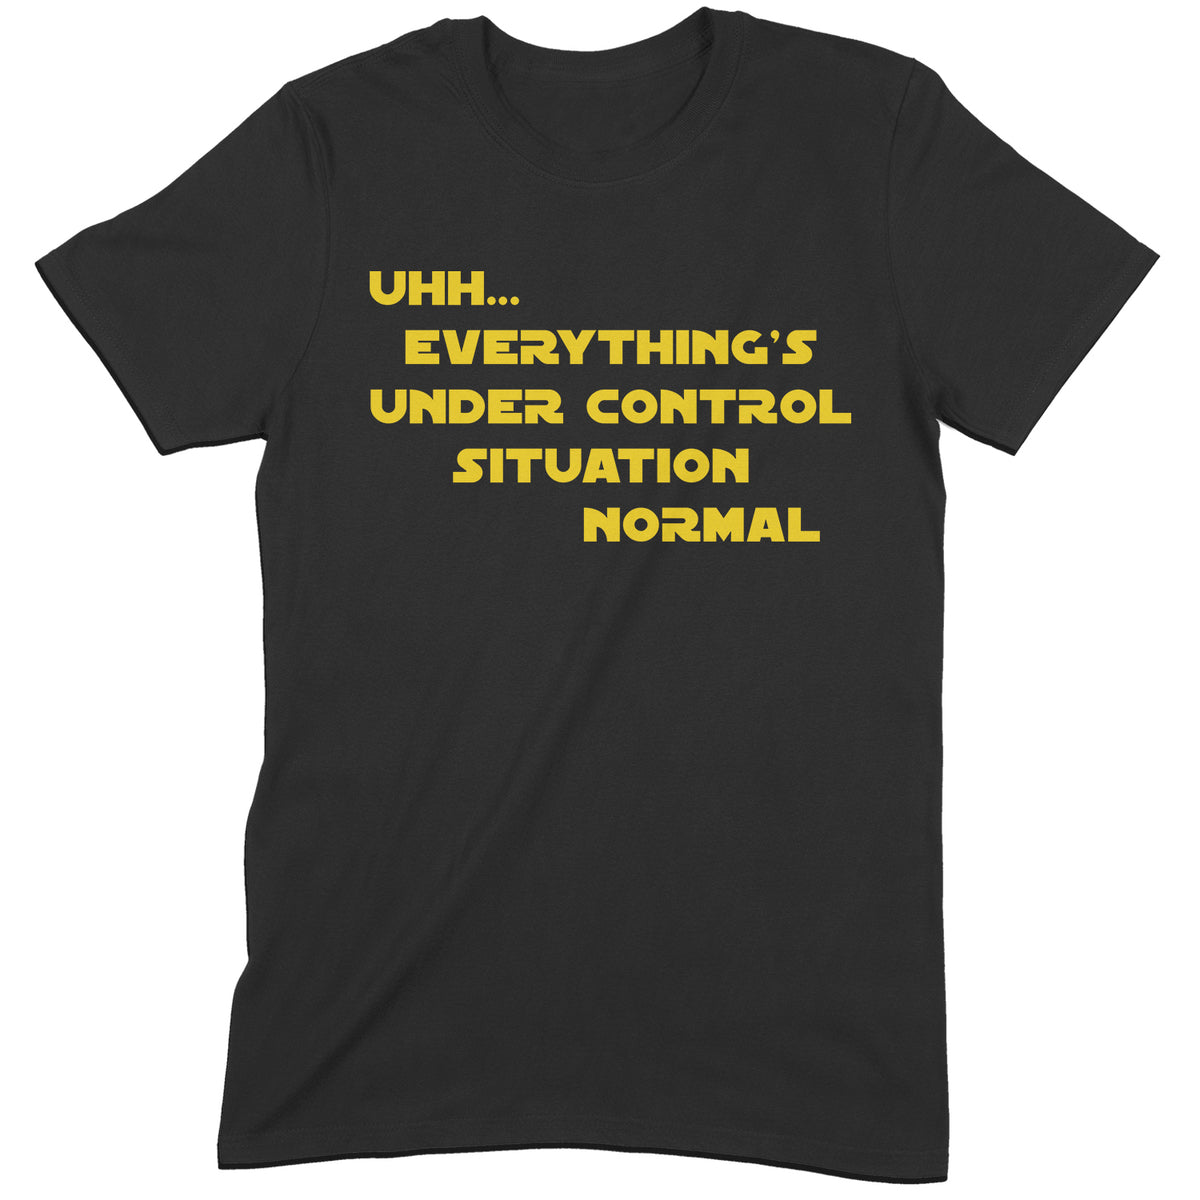 "Everything's Under Control" Premium Midweight Ringspun Cotton T-Shirt - Mens/Womens Fits